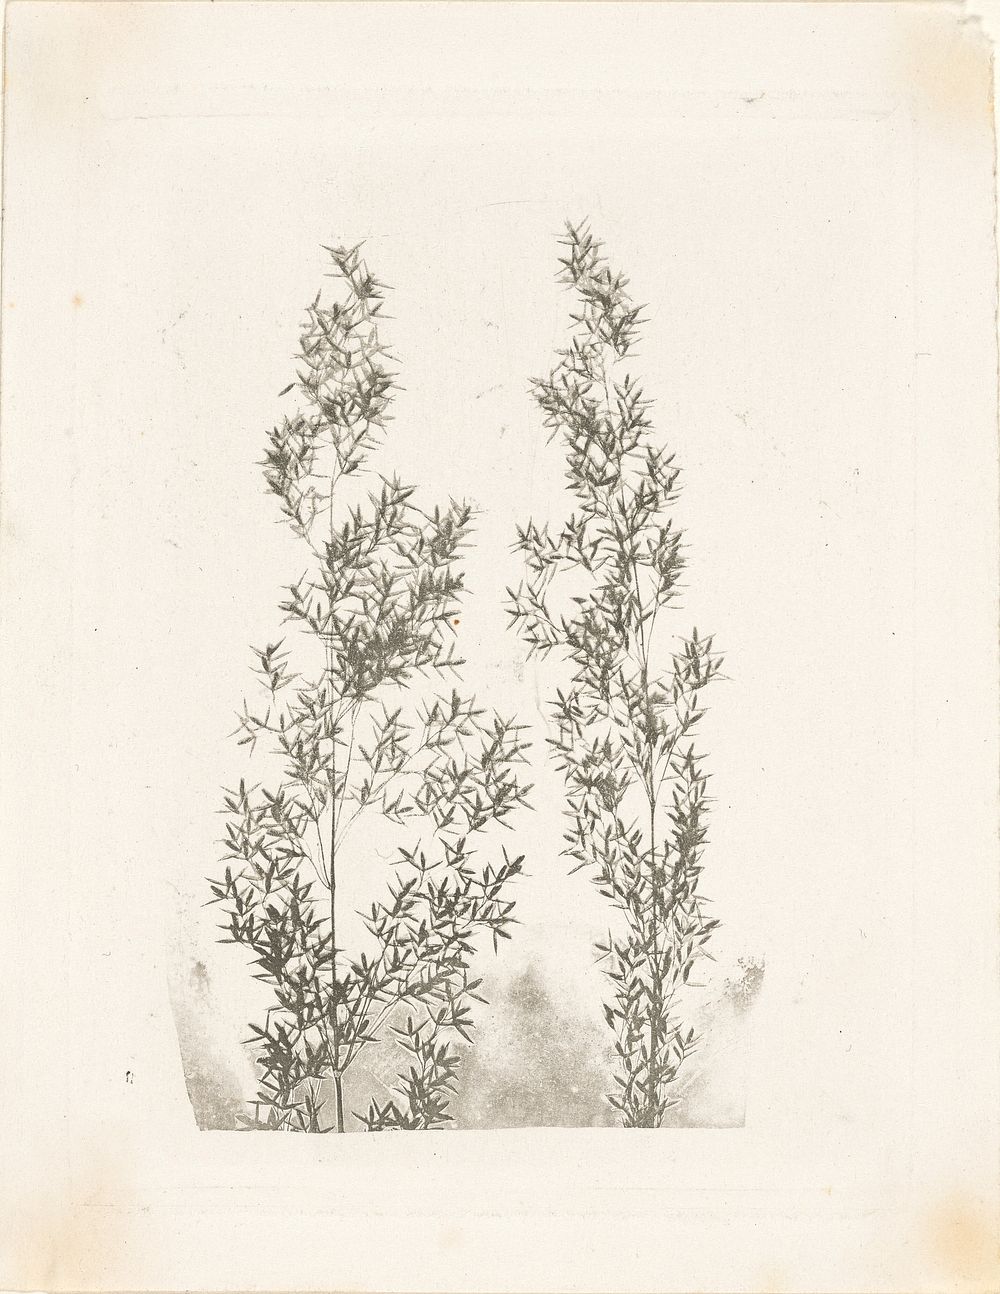 Two Leafy Stalks of Bamboo by William Henry Fox Talbot